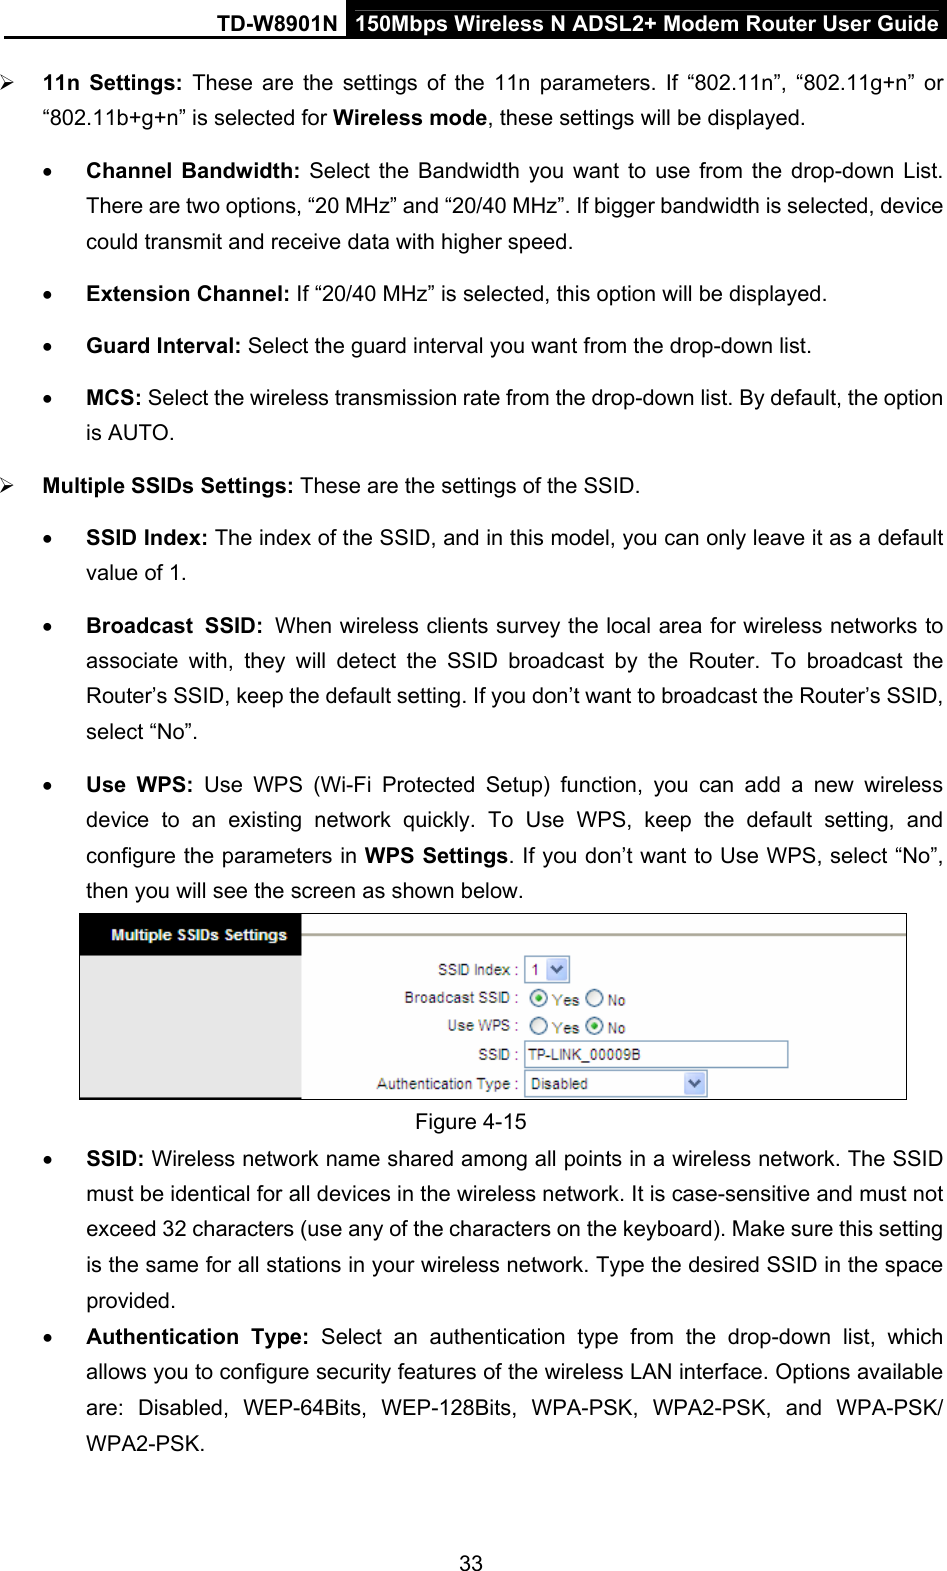 TD-W8901N  150Mbps Wireless N ADSL2+ Modem Router User Guide 33  11n Settings: These are the settings of the 11n parameters. If “802.11n”, “802.11g+n” or “802.11b+g+n” is selected for Wireless mode, these settings will be displayed.  Channel Bandwidth: Select the Bandwidth you want to use from the drop-down List. There are two options, “20 MHz” and “20/40 MHz”. If bigger bandwidth is selected, device could transmit and receive data with higher speed.  Extension Channel: If “20/40 MHz” is selected, this option will be displayed.  Guard Interval: Select the guard interval you want from the drop-down list.  MCS: Select the wireless transmission rate from the drop-down list. By default, the option is AUTO.  Multiple SSIDs Settings: These are the settings of the SSID.  SSID Index: The index of the SSID, and in this model, you can only leave it as a default value of 1.  Broadcast SSID: When wireless clients survey the local area for wireless networks to associate with, they will detect the SSID broadcast by the Router. To broadcast the Router’s SSID, keep the default setting. If you don’t want to broadcast the Router’s SSID, select “No”.  Use WPS: Use WPS (Wi-Fi Protected Setup) function, you can add a new wireless device to an existing network quickly. To Use WPS, keep the default setting, and configure the parameters in WPS Settings. If you don’t want to Use WPS, select “No”, then you will see the screen as shown below.  Figure 4-15  SSID: Wireless network name shared among all points in a wireless network. The SSID must be identical for all devices in the wireless network. It is case-sensitive and must not exceed 32 characters (use any of the characters on the keyboard). Make sure this setting is the same for all stations in your wireless network. Type the desired SSID in the space provided.  Authentication Type: Select an authentication type from the drop-down list, which allows you to configure security features of the wireless LAN interface. Options available are: Disabled, WEP-64Bits, WEP-128Bits, WPA-PSK, WPA2-PSK, and WPA-PSK/ WPA2-PSK.  